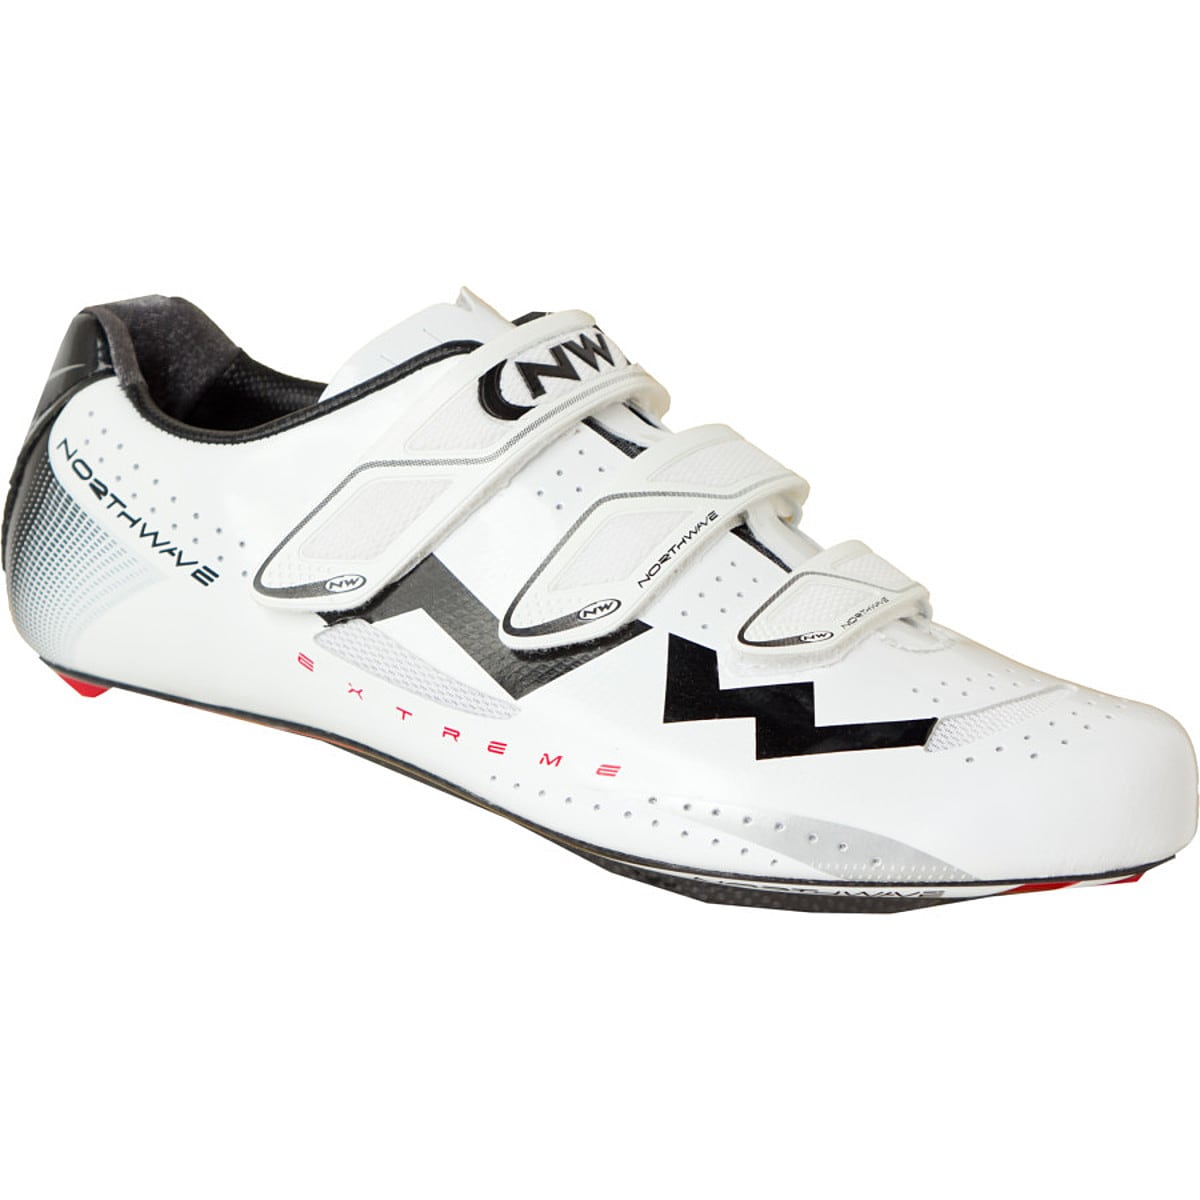 Northwave Extreme Shoes Mens